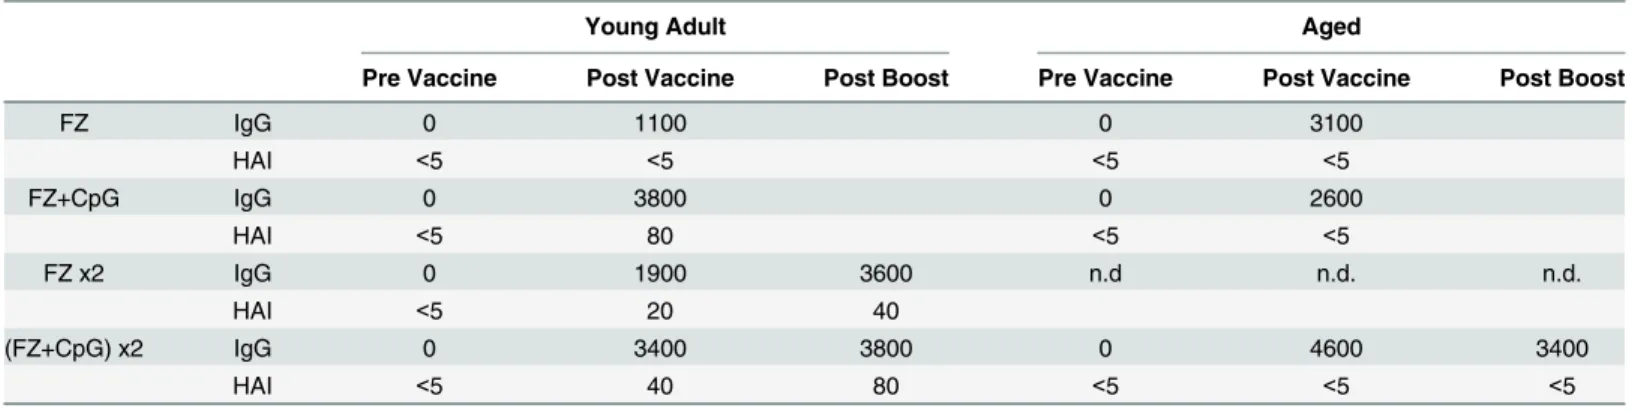 Table 1. Heme agglutination inhibition and Influenza-specific IgG titers in sera of immunized mice.